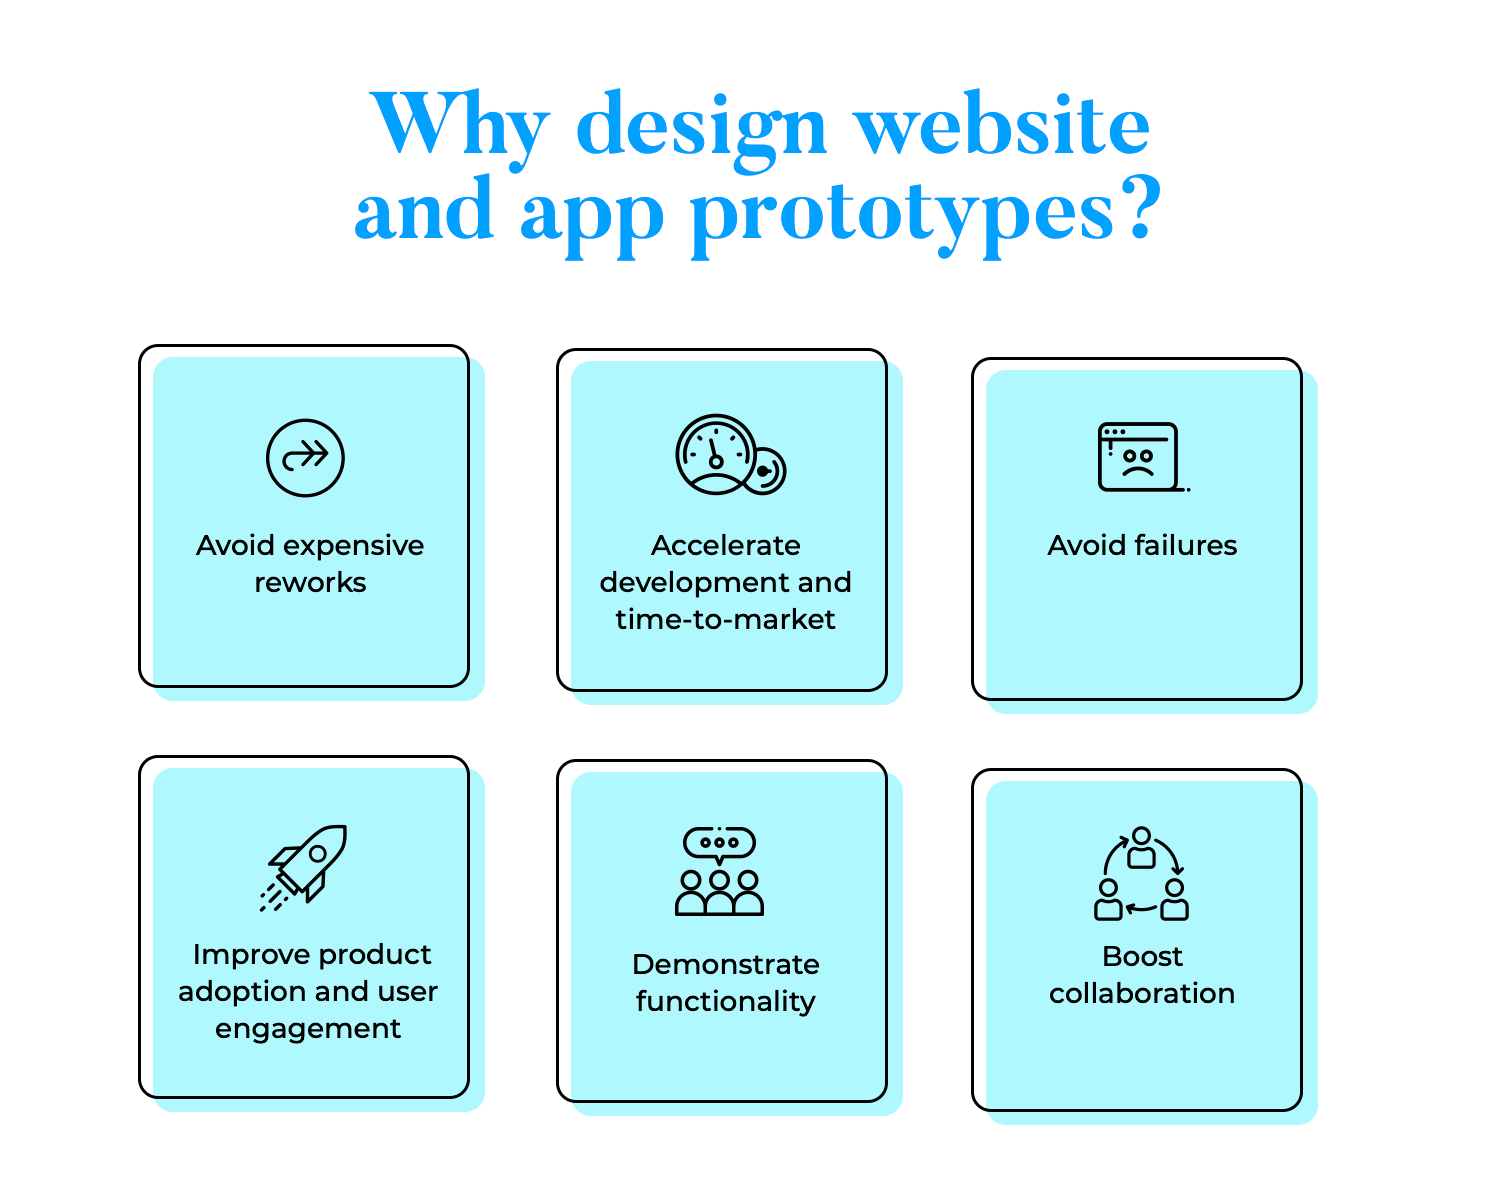 Reasons to design web and app prototypes